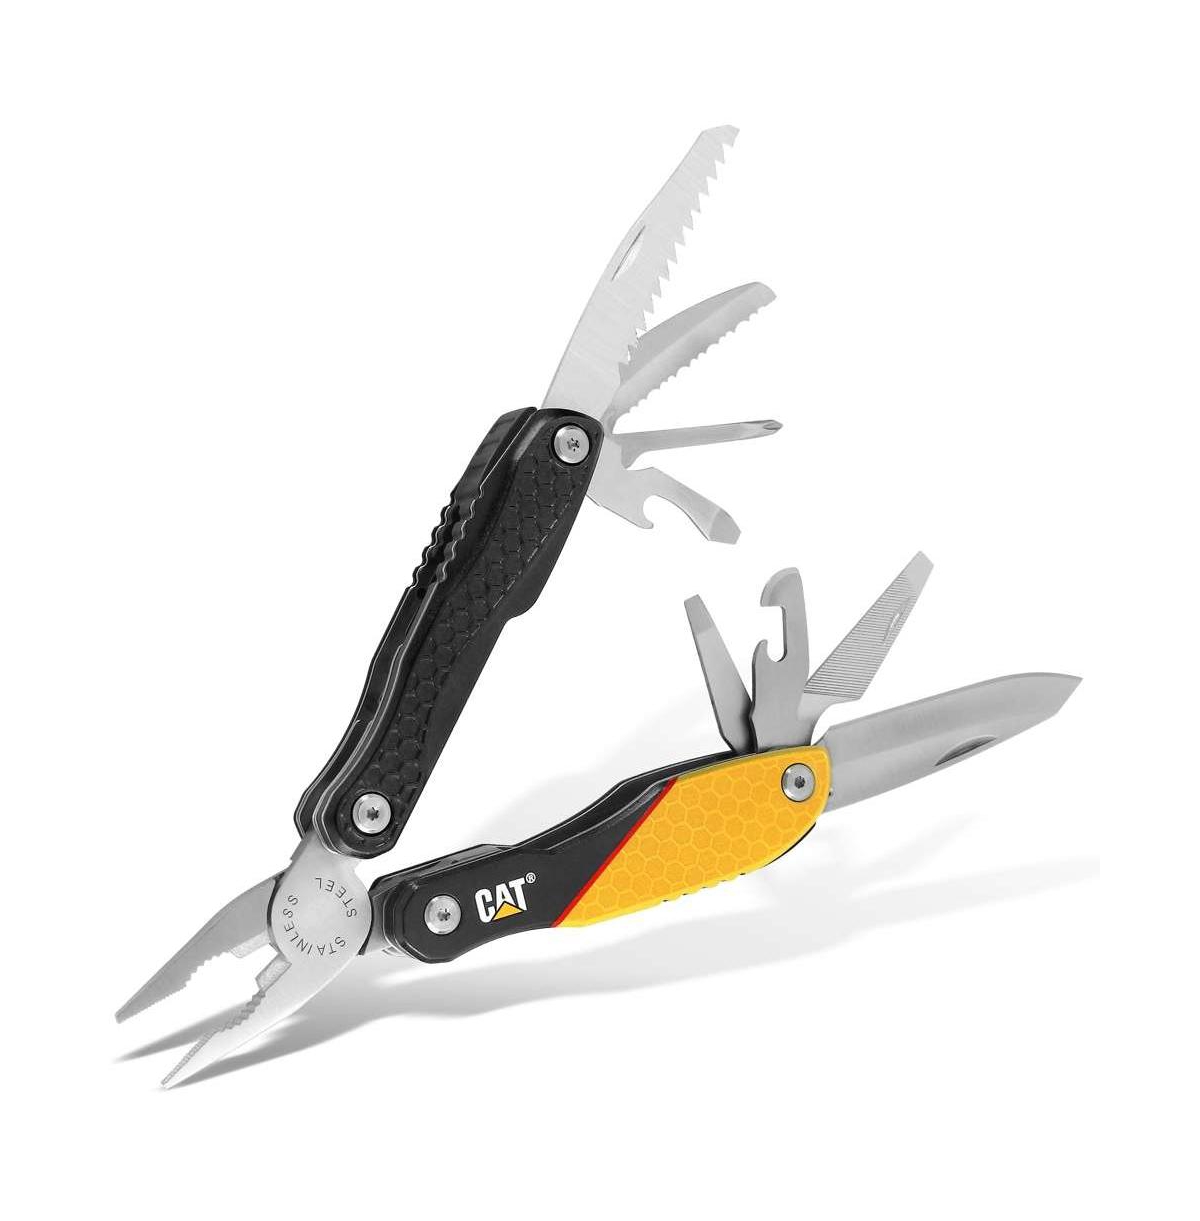 13-in-1 Multi-Tool with Pliers - Yellow